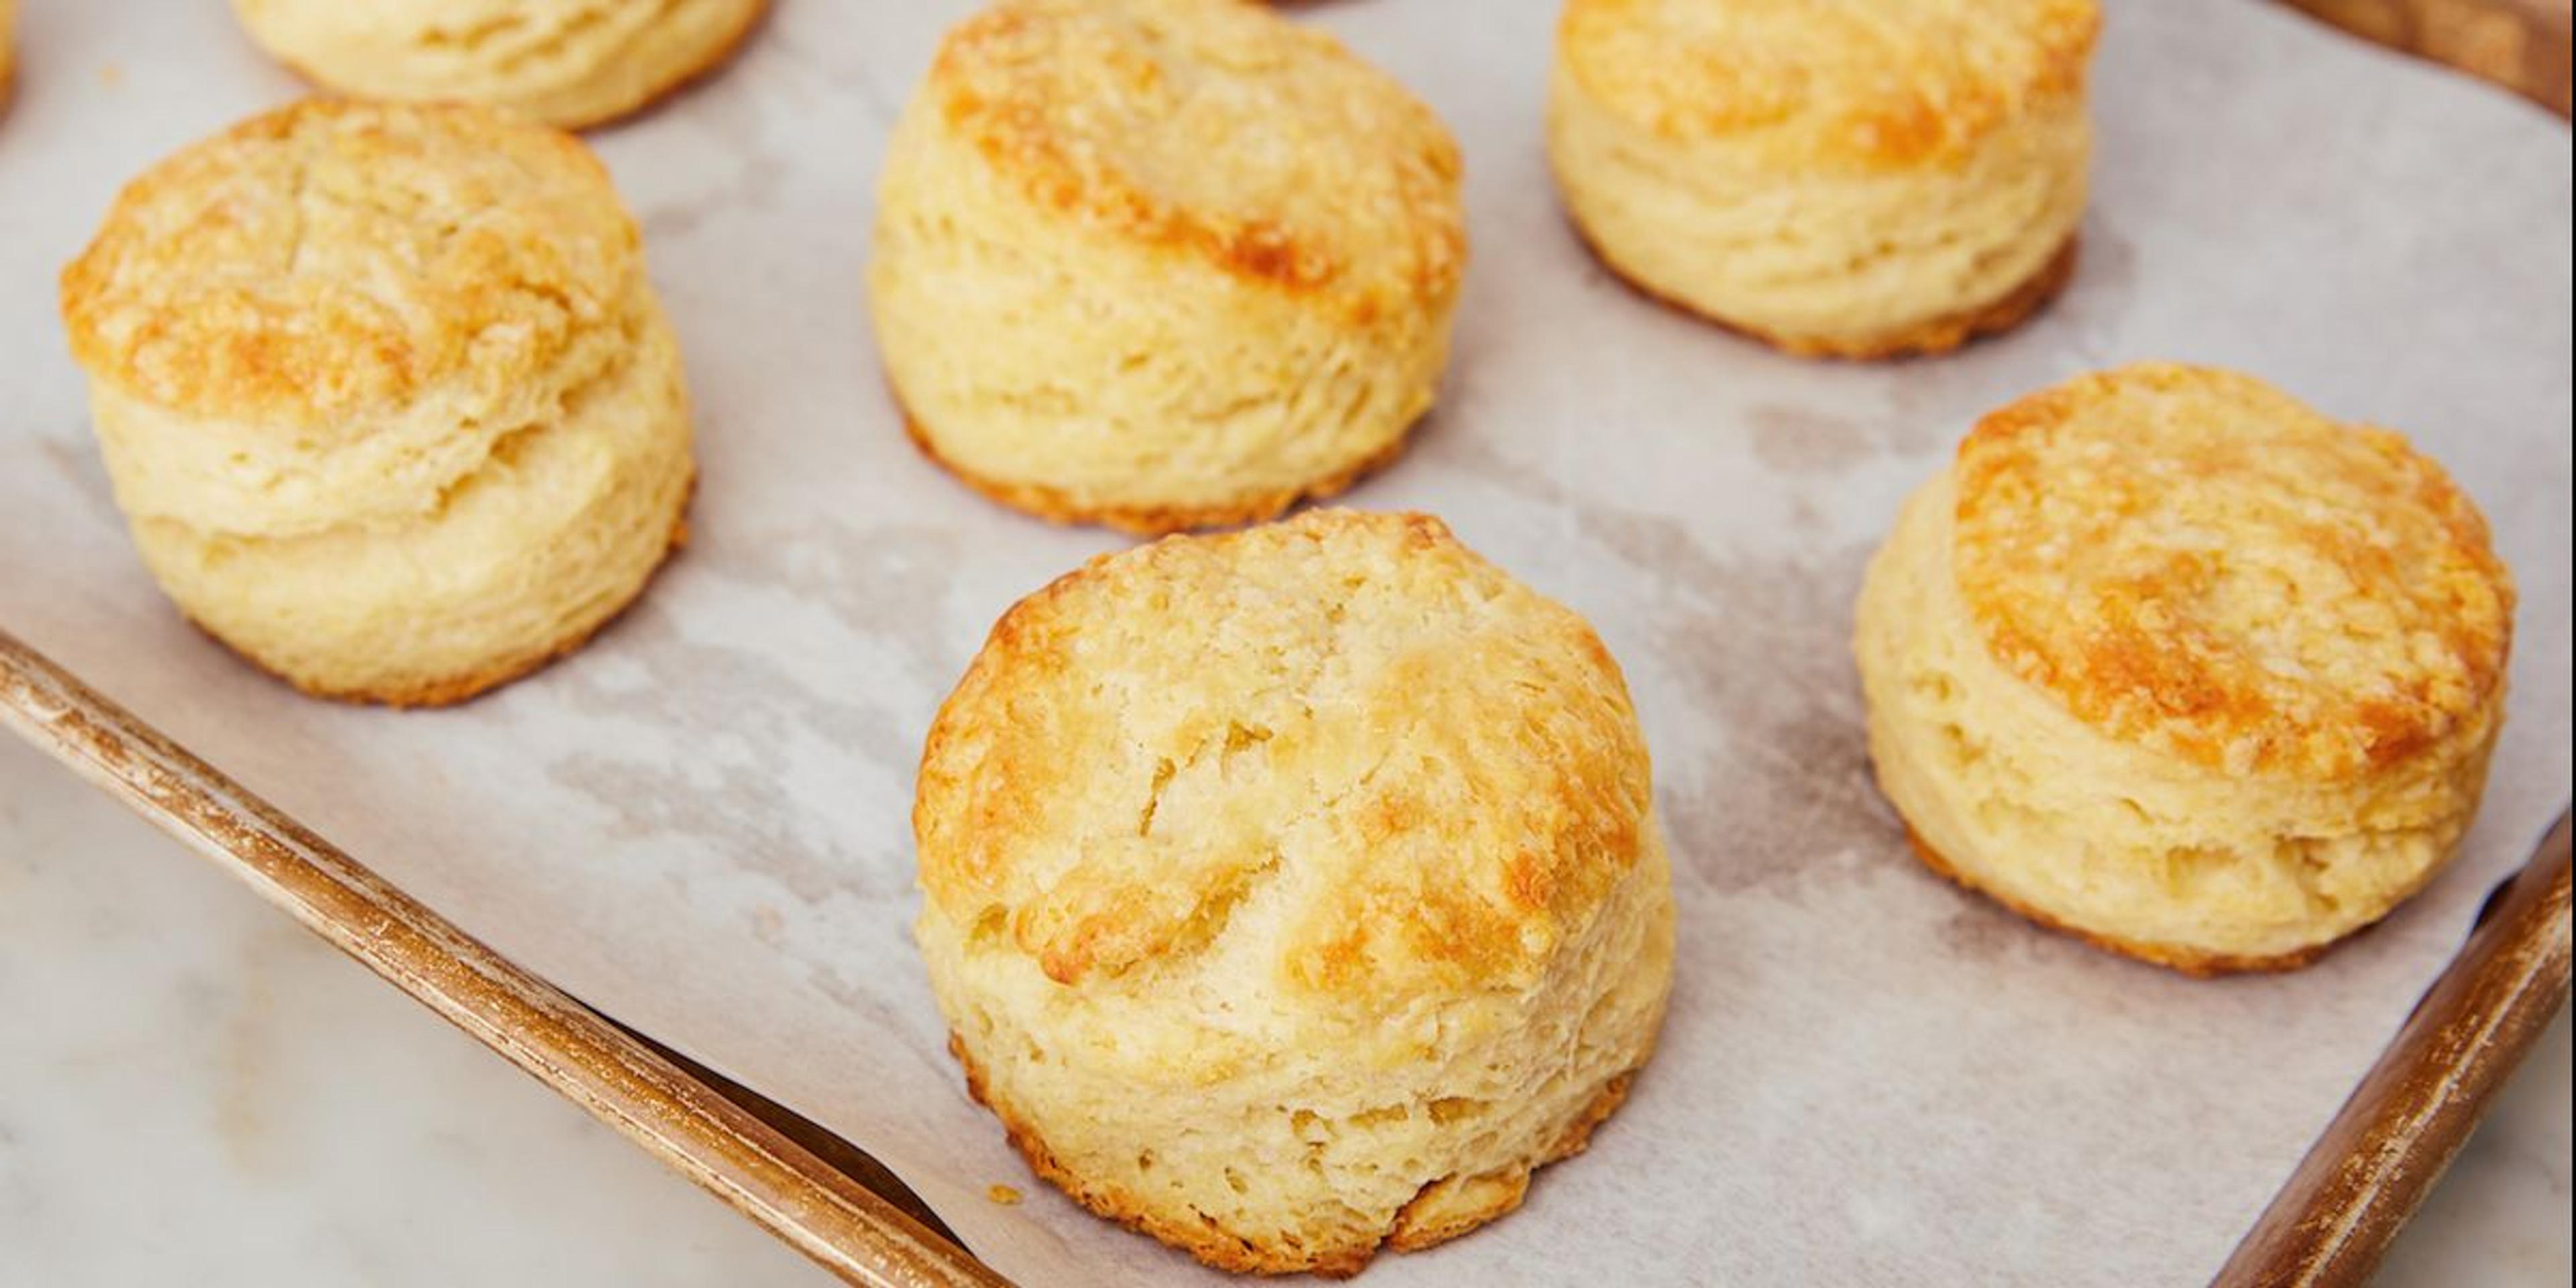 Homemade Biscuits Recipe - How To Make Homemade Biscuits